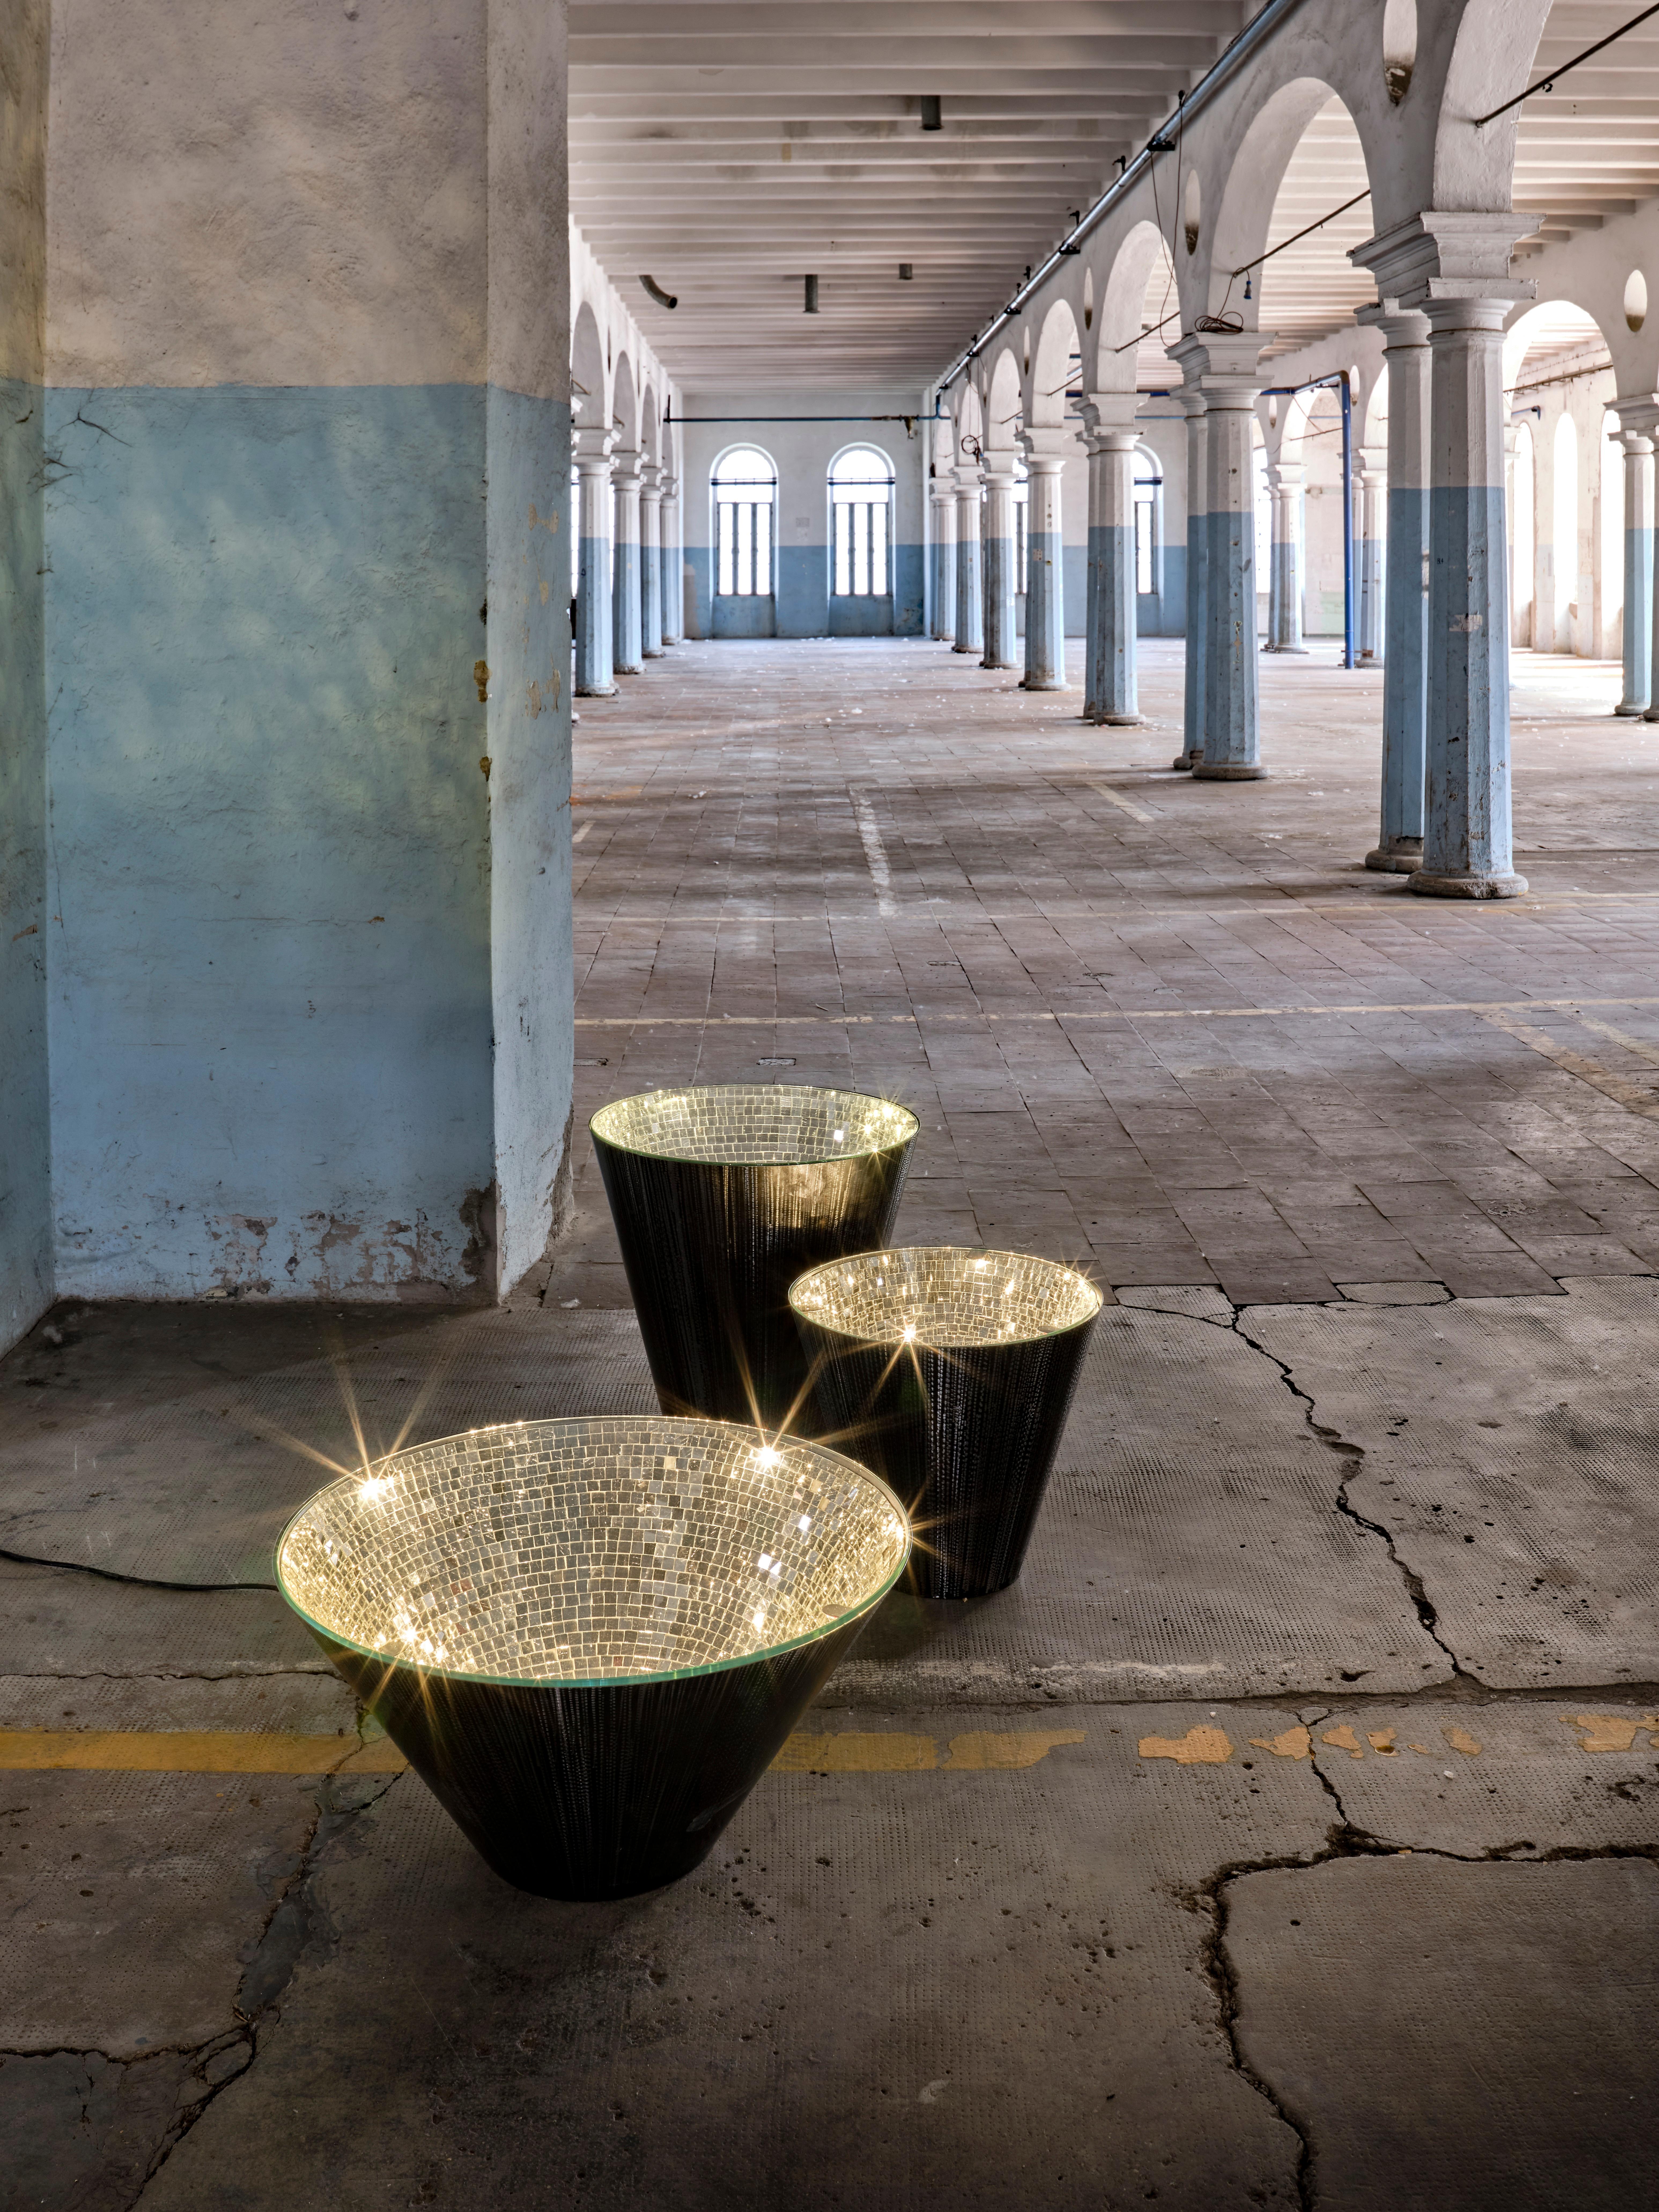 Silver Narciso table by Davide Medri.
Materials: mirror mosaic, iron.
Also available in gold. 
Dimensions: Ø 50 x H 45 cm.
Also available in Ø 60 x H 60, Ø 80 x H 40 cm.

Davide Medri was born in Cesena on August 7th 1967 and graduated at the